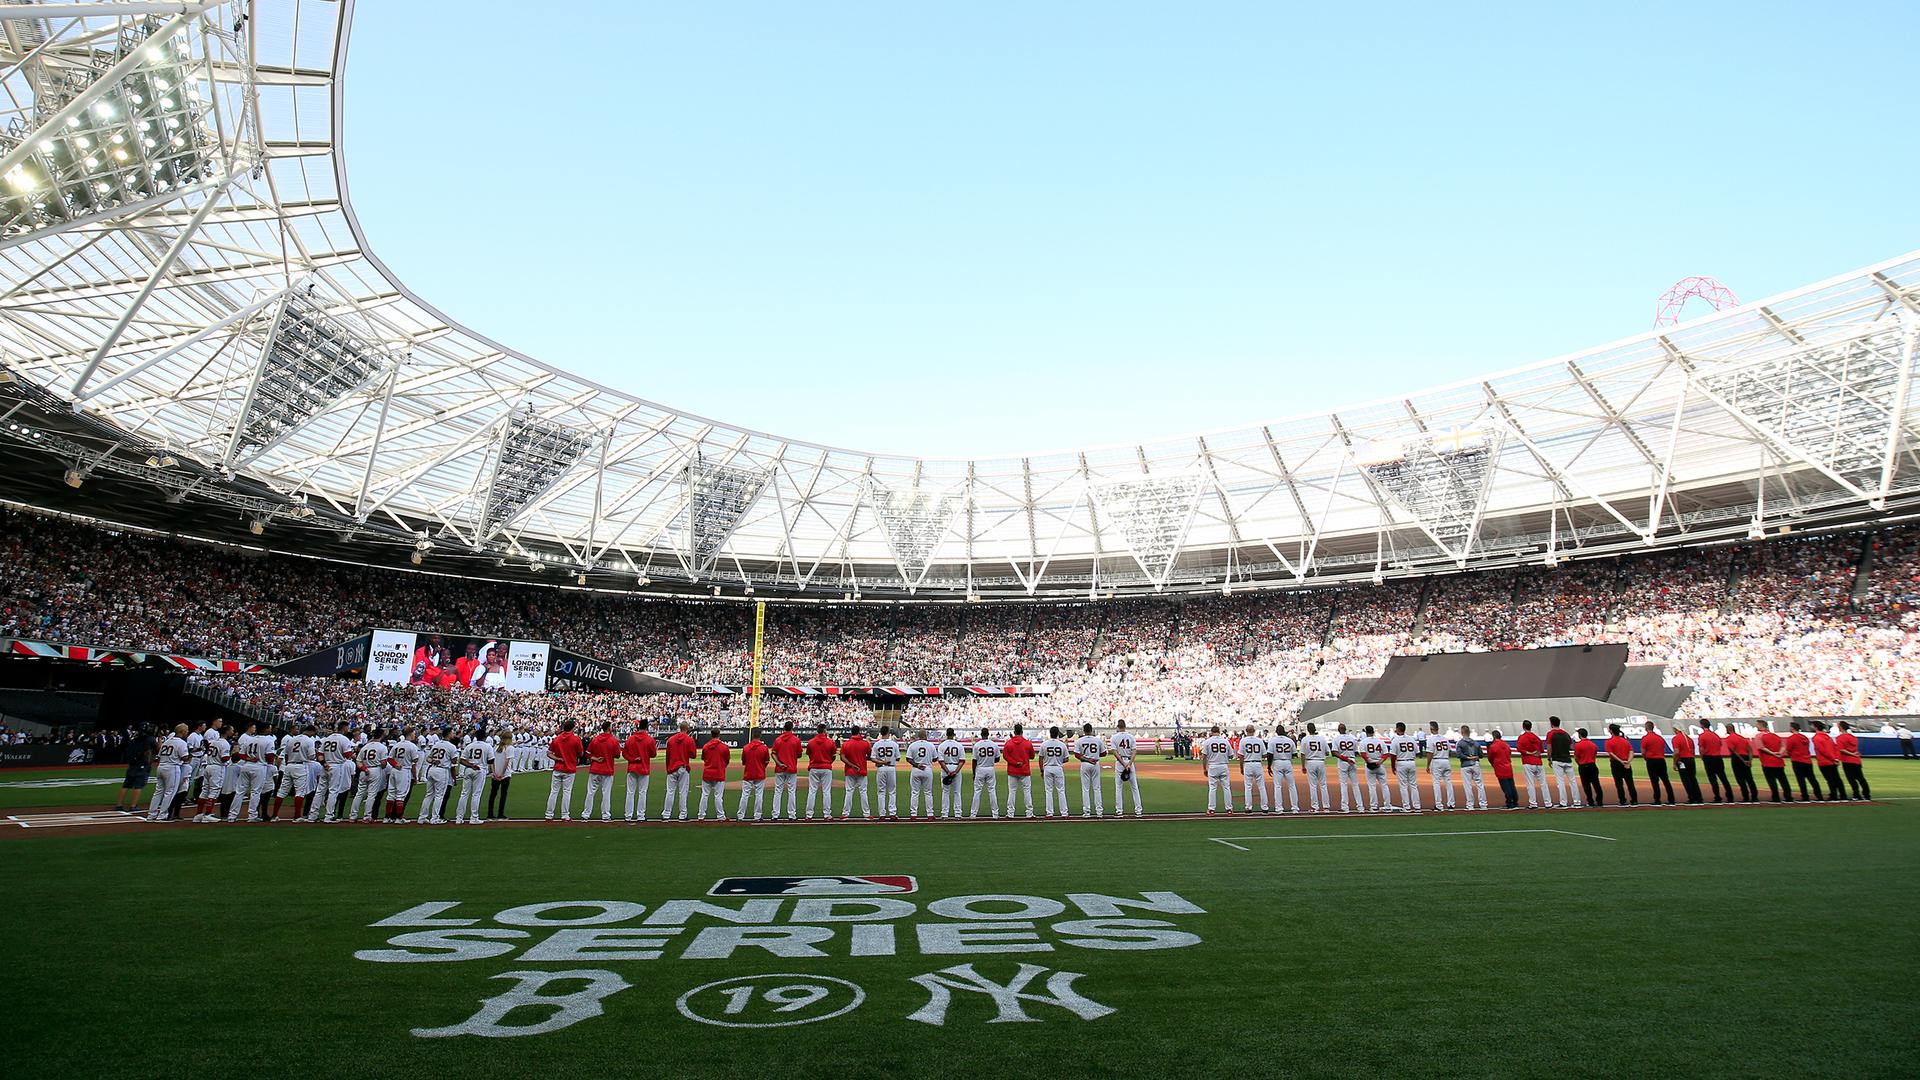 The Red Sox line up before a game at London Stadium in 2019